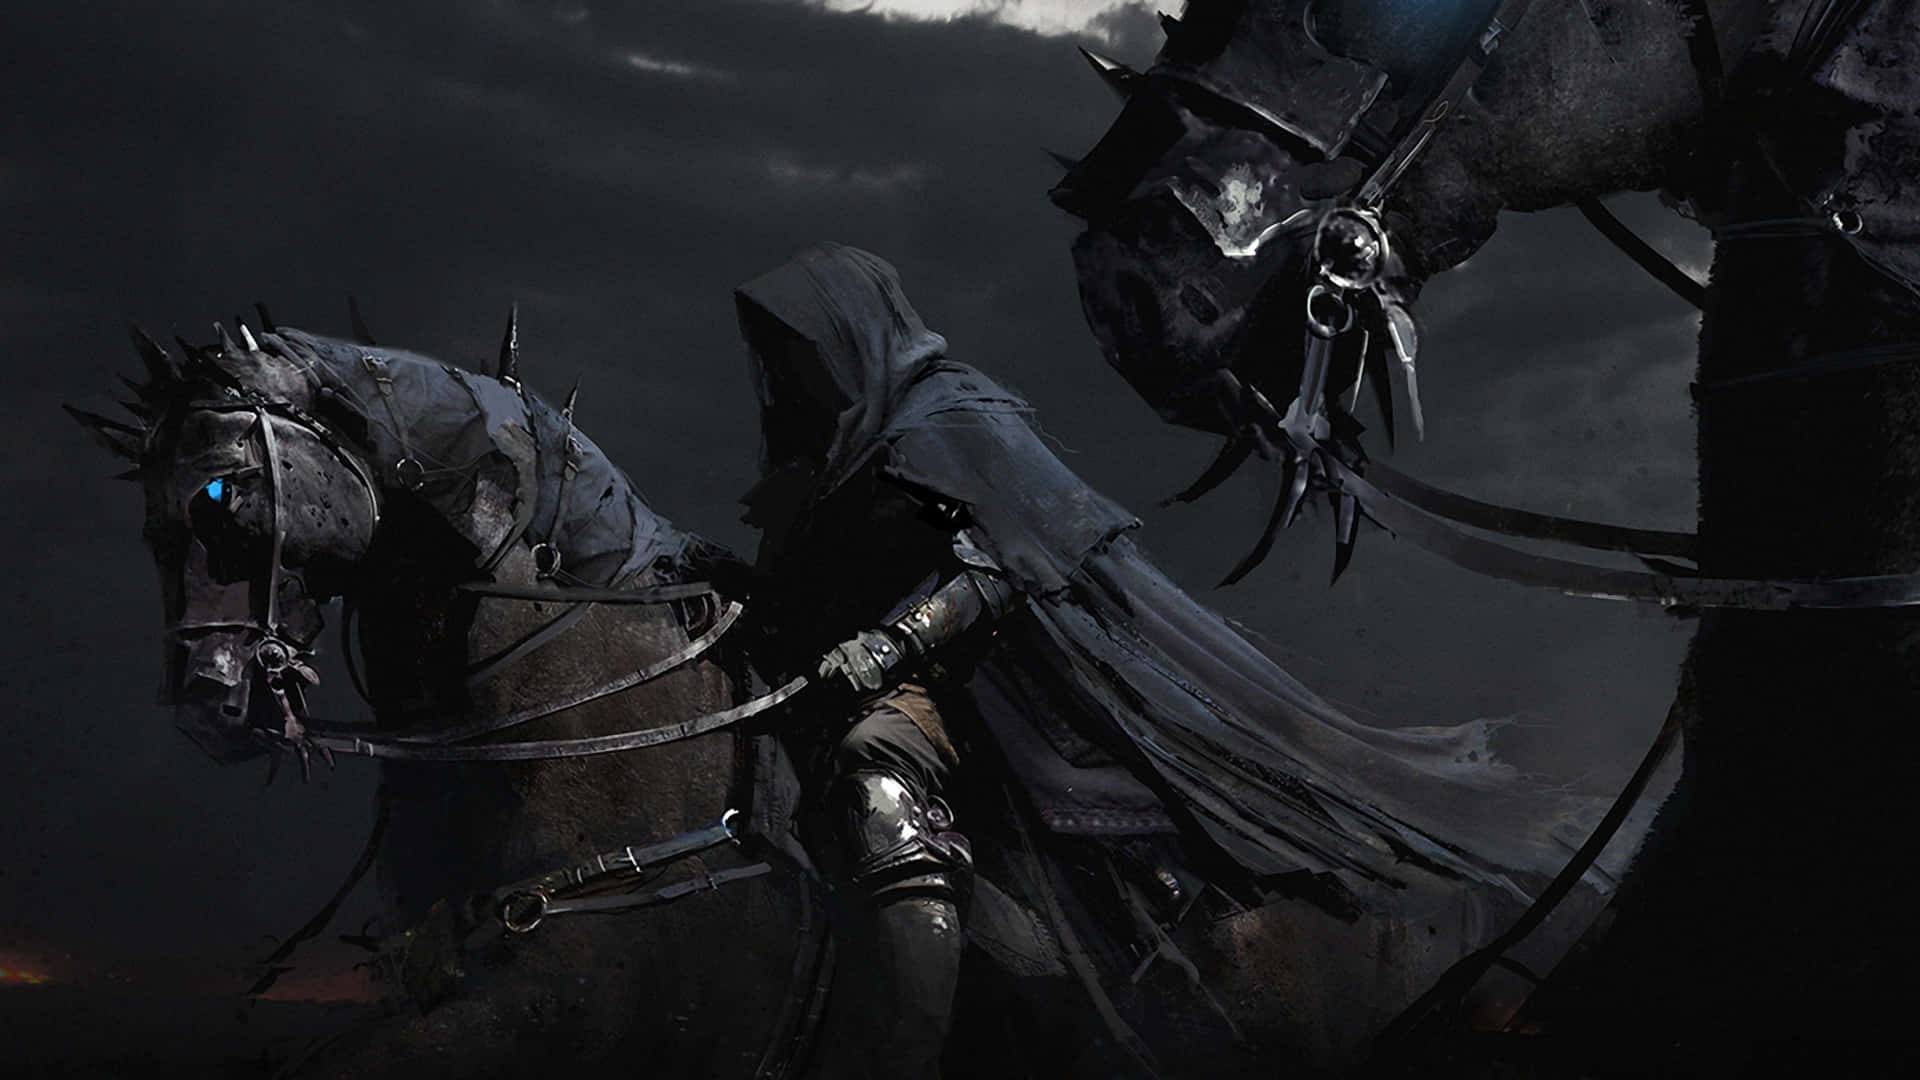 Two Black Horses With Cloaks On Them Background